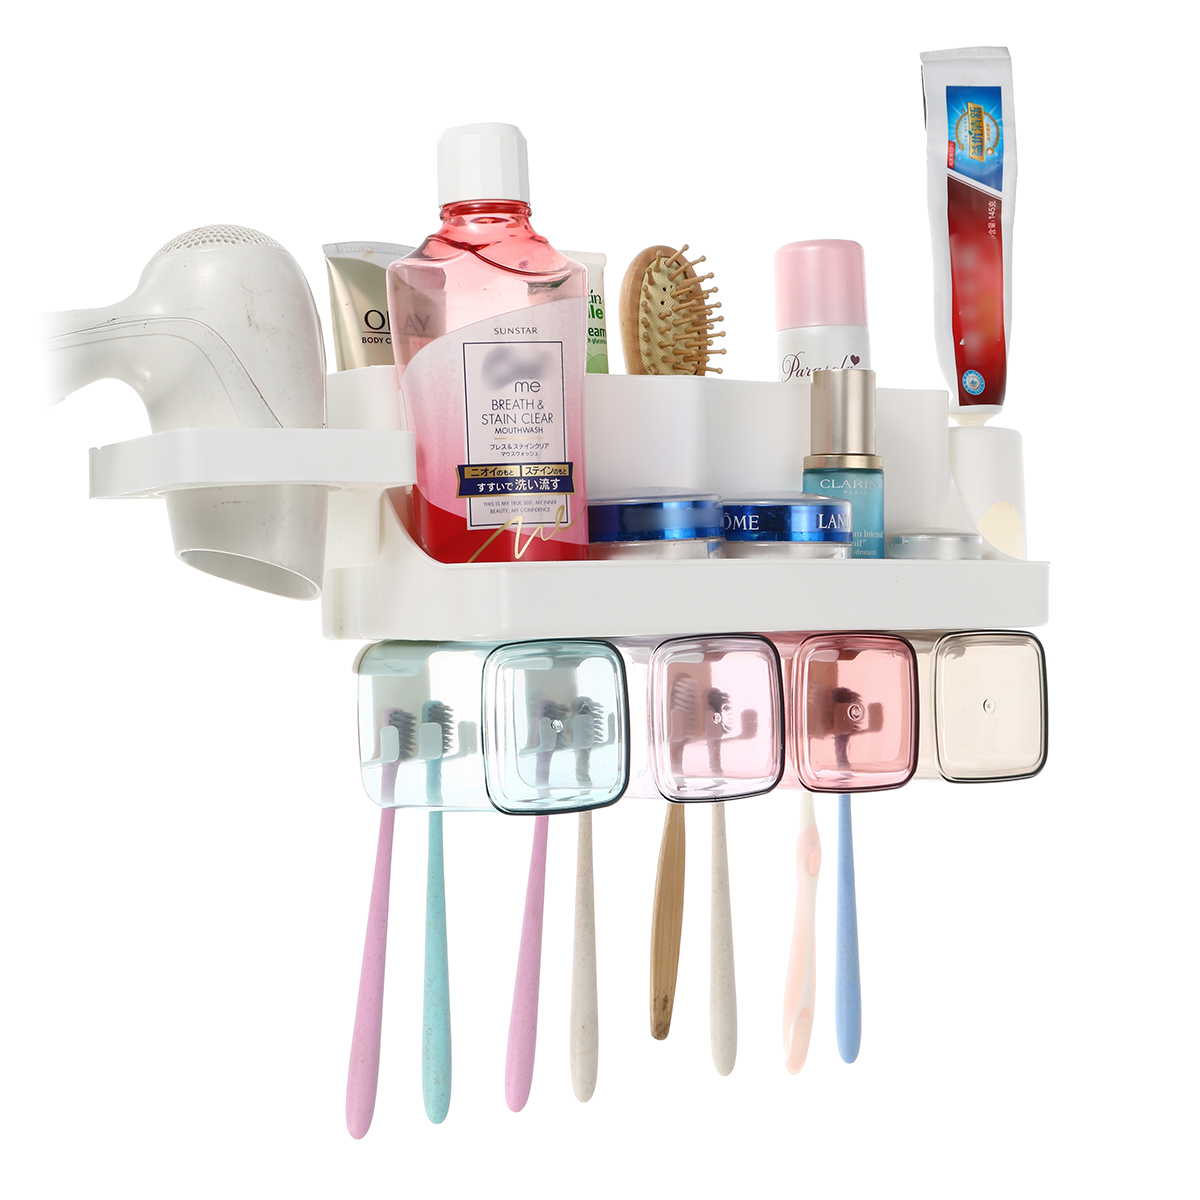 Toothpaste-Holders-Toothbrush-Rack-Wall-Mounted-Space-Saving-Toothbrush-Toothpaste-Squeezer-Kit-With-1801949-14